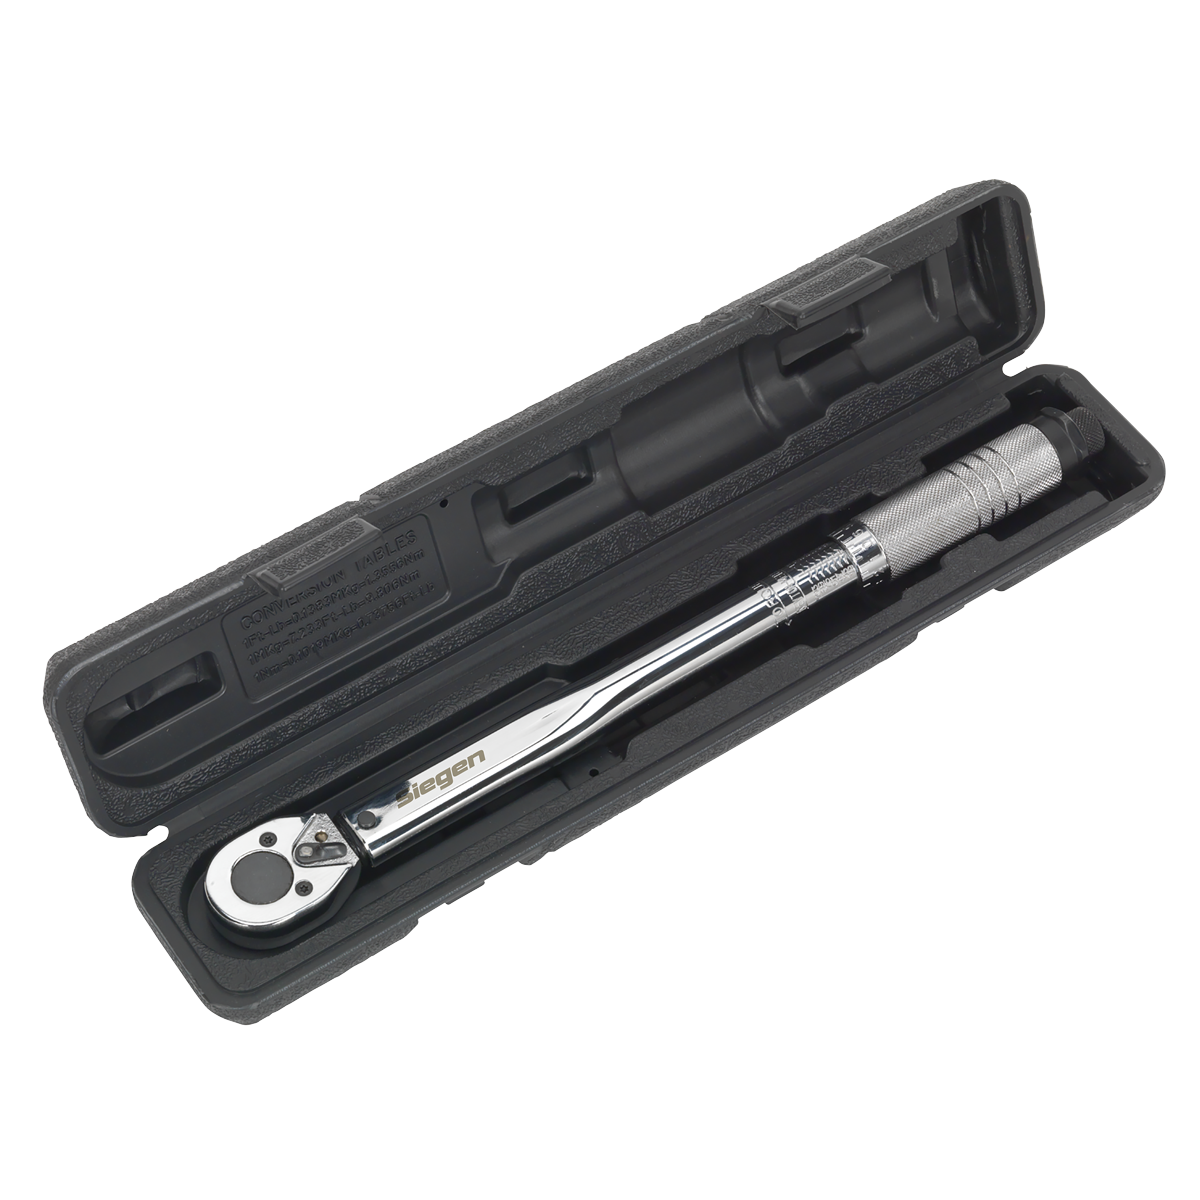 Sealey Torque Wrench 3/8"Sq Drive